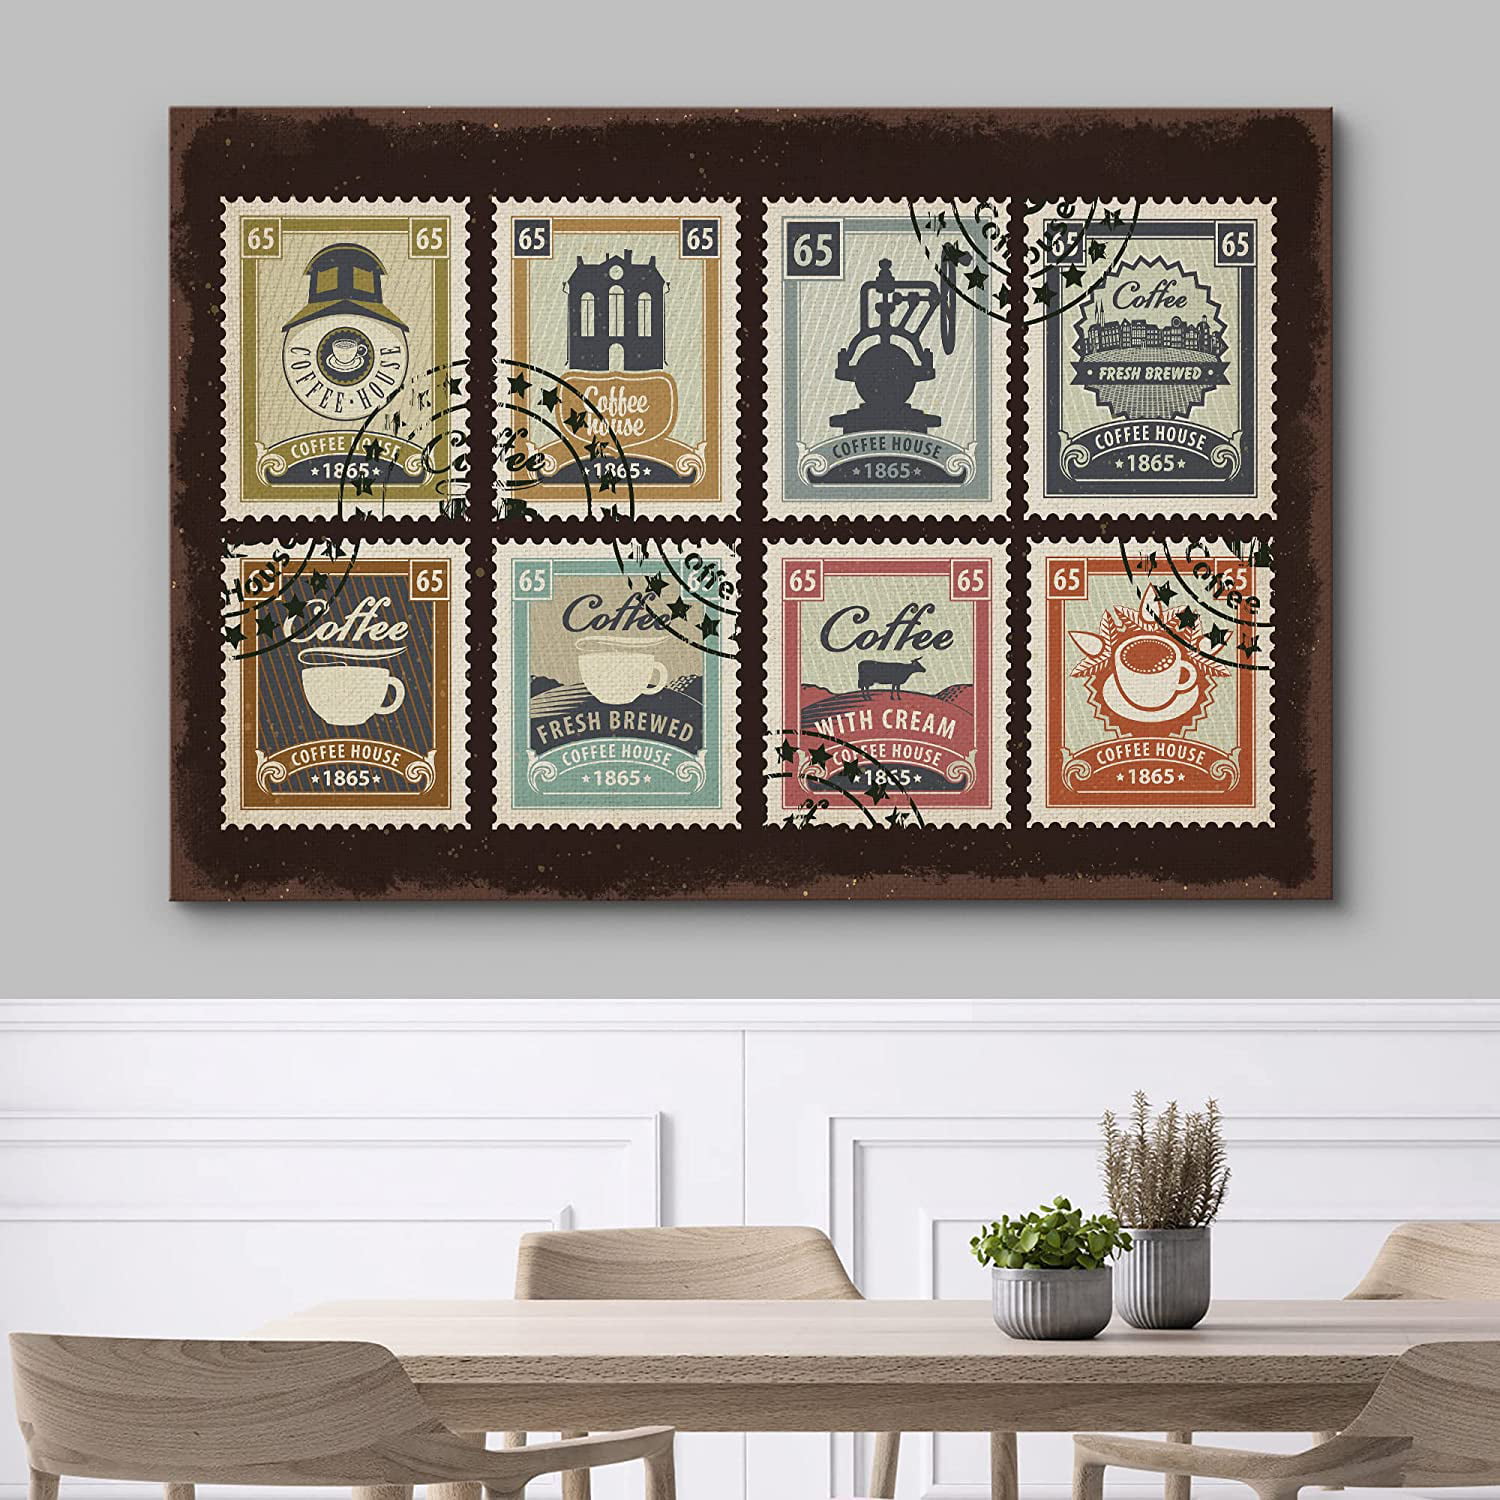 Canvas Print Wall Art New Orleans Style Coffee House Stamp Collage Food   Cooking Kitchen Illustrations Modern Art Decorative Rustic for Living Room,  Bedroom, Office 12